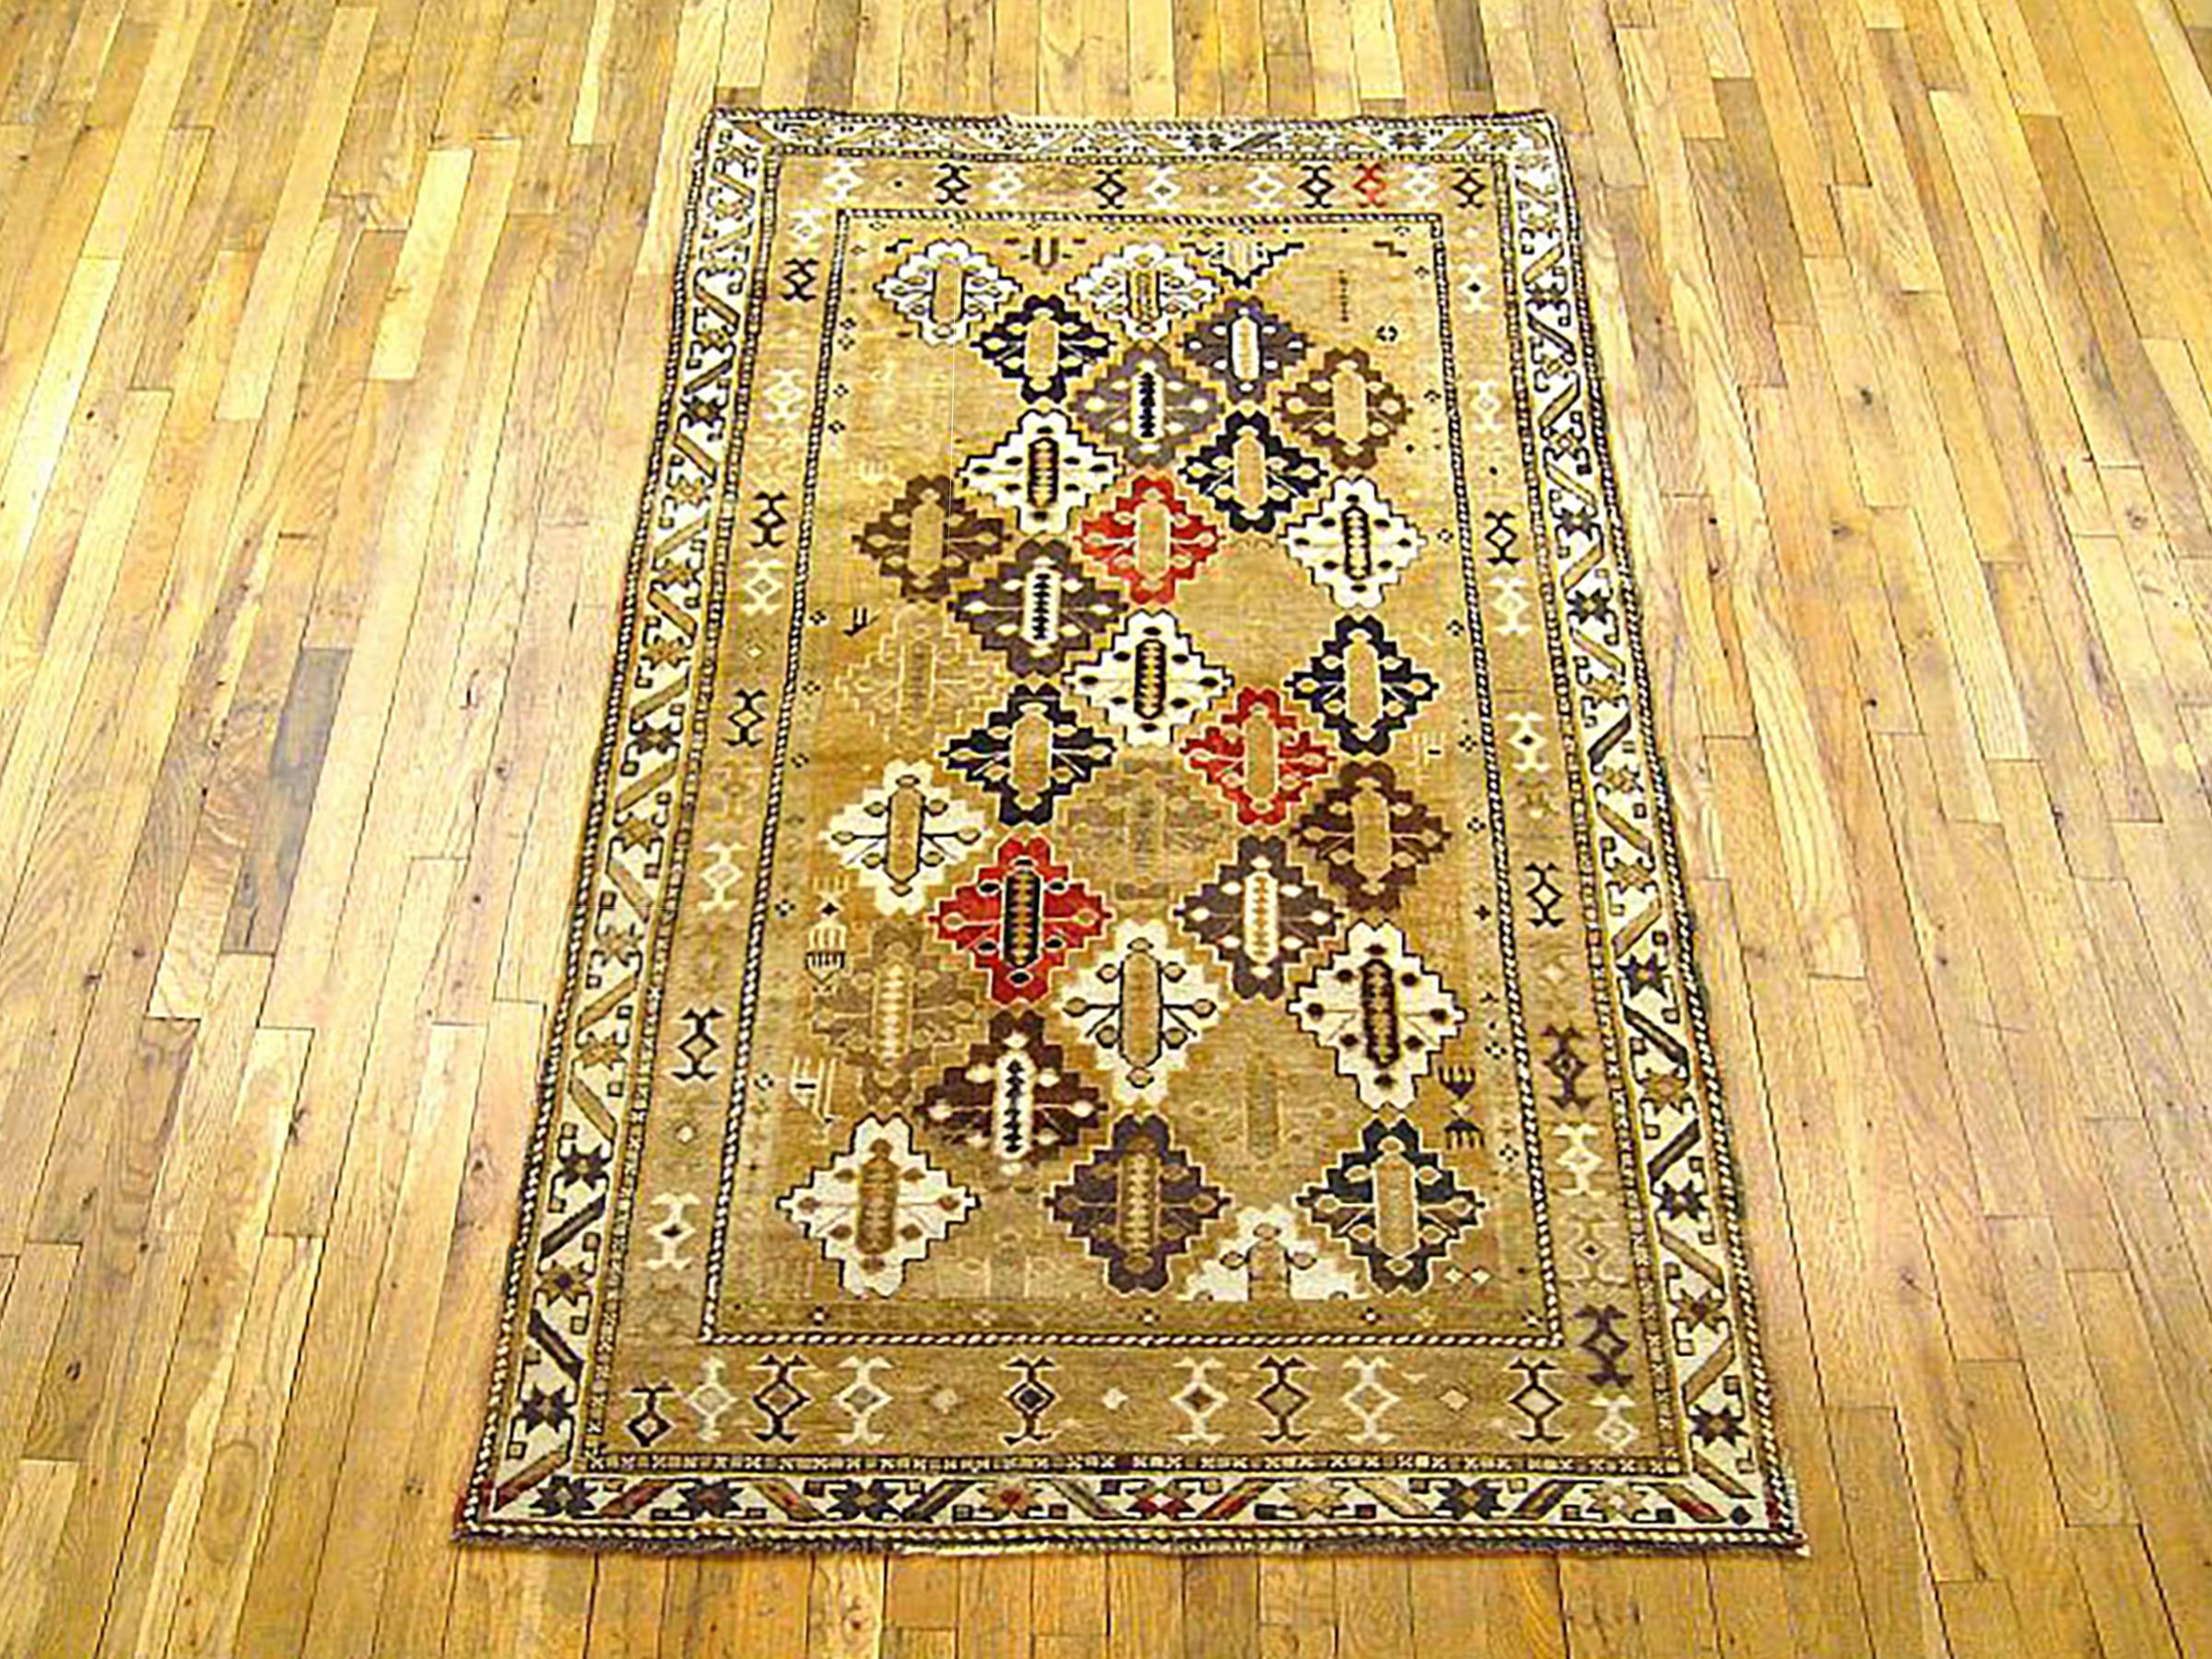 Antique Caucasian Shirvan rug, Small size, circa 1920

A one-of-a-kind antique Caucasian Shirvan Oriental Carpet, hand-knotted with soft wool pile. This lovely hand-knotted wool rug features an intricate Diamond and Petagh design allover the beige